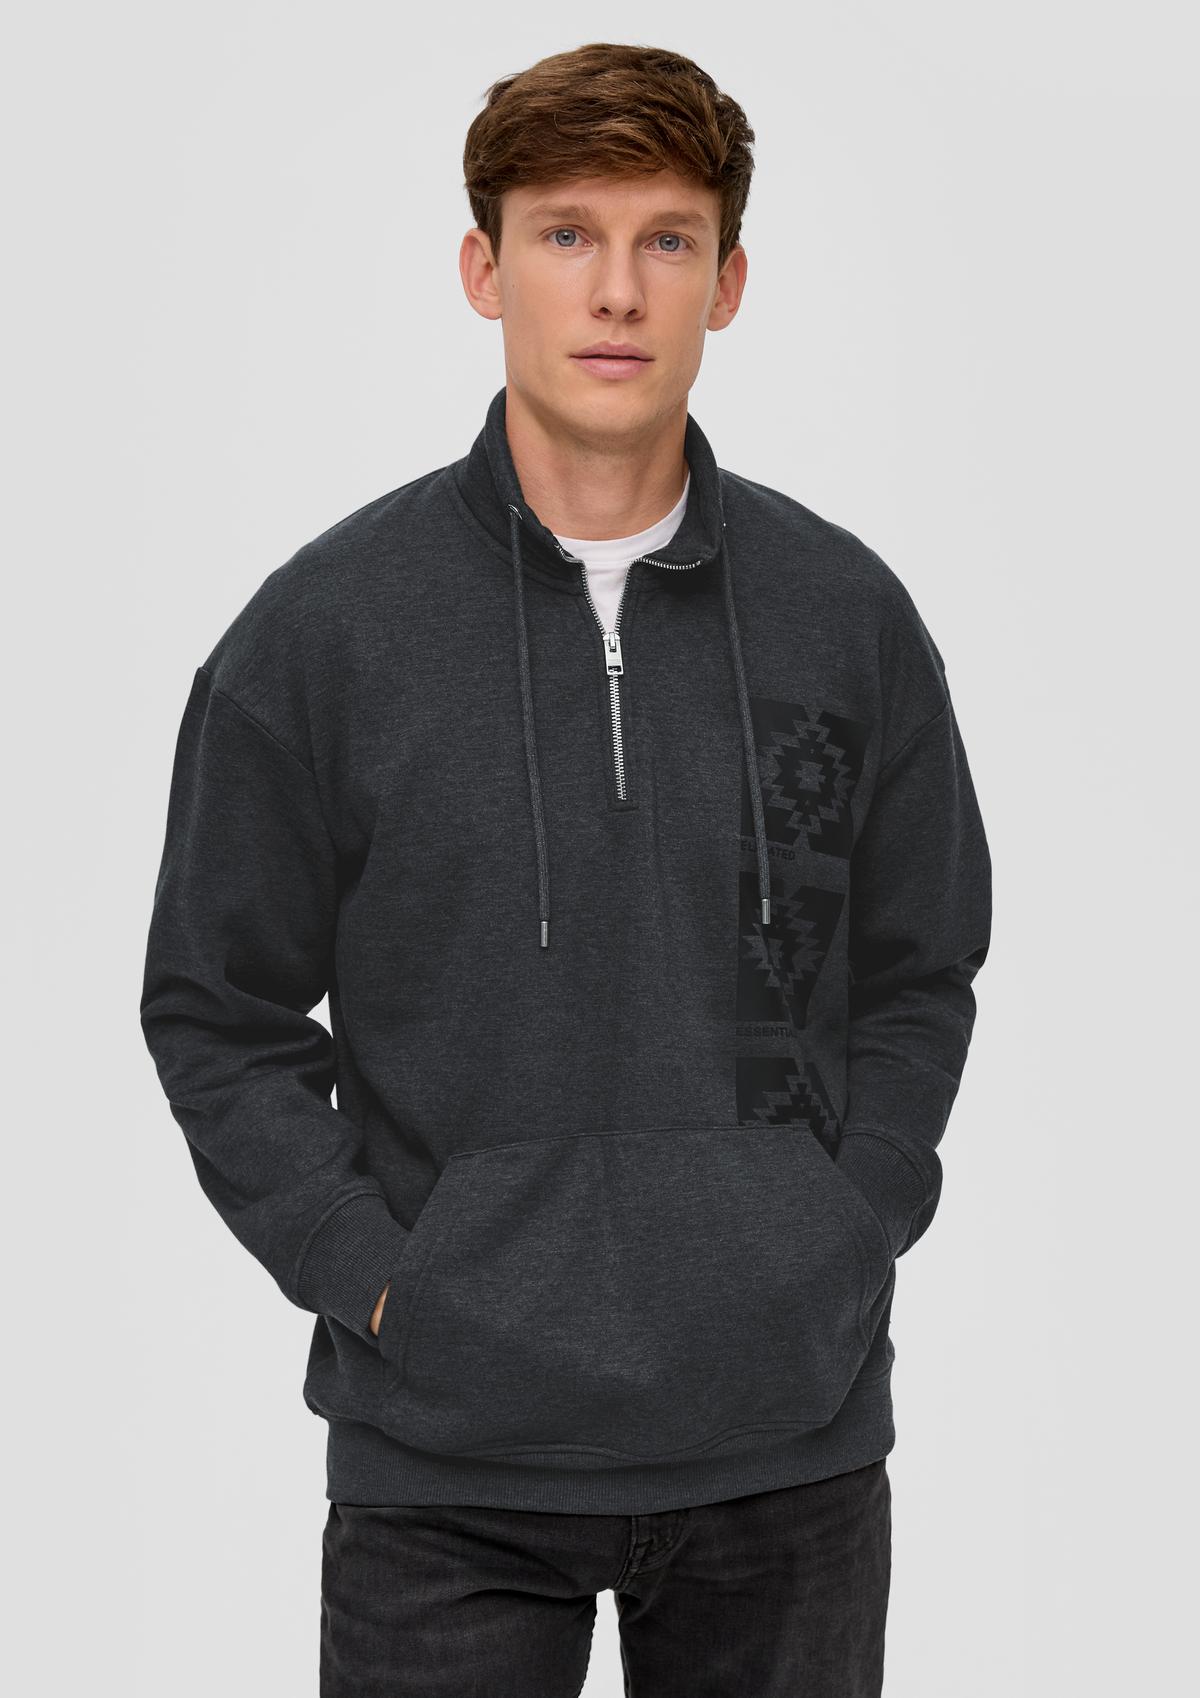 s.Oliver Sweatshirt with a button/zip neck